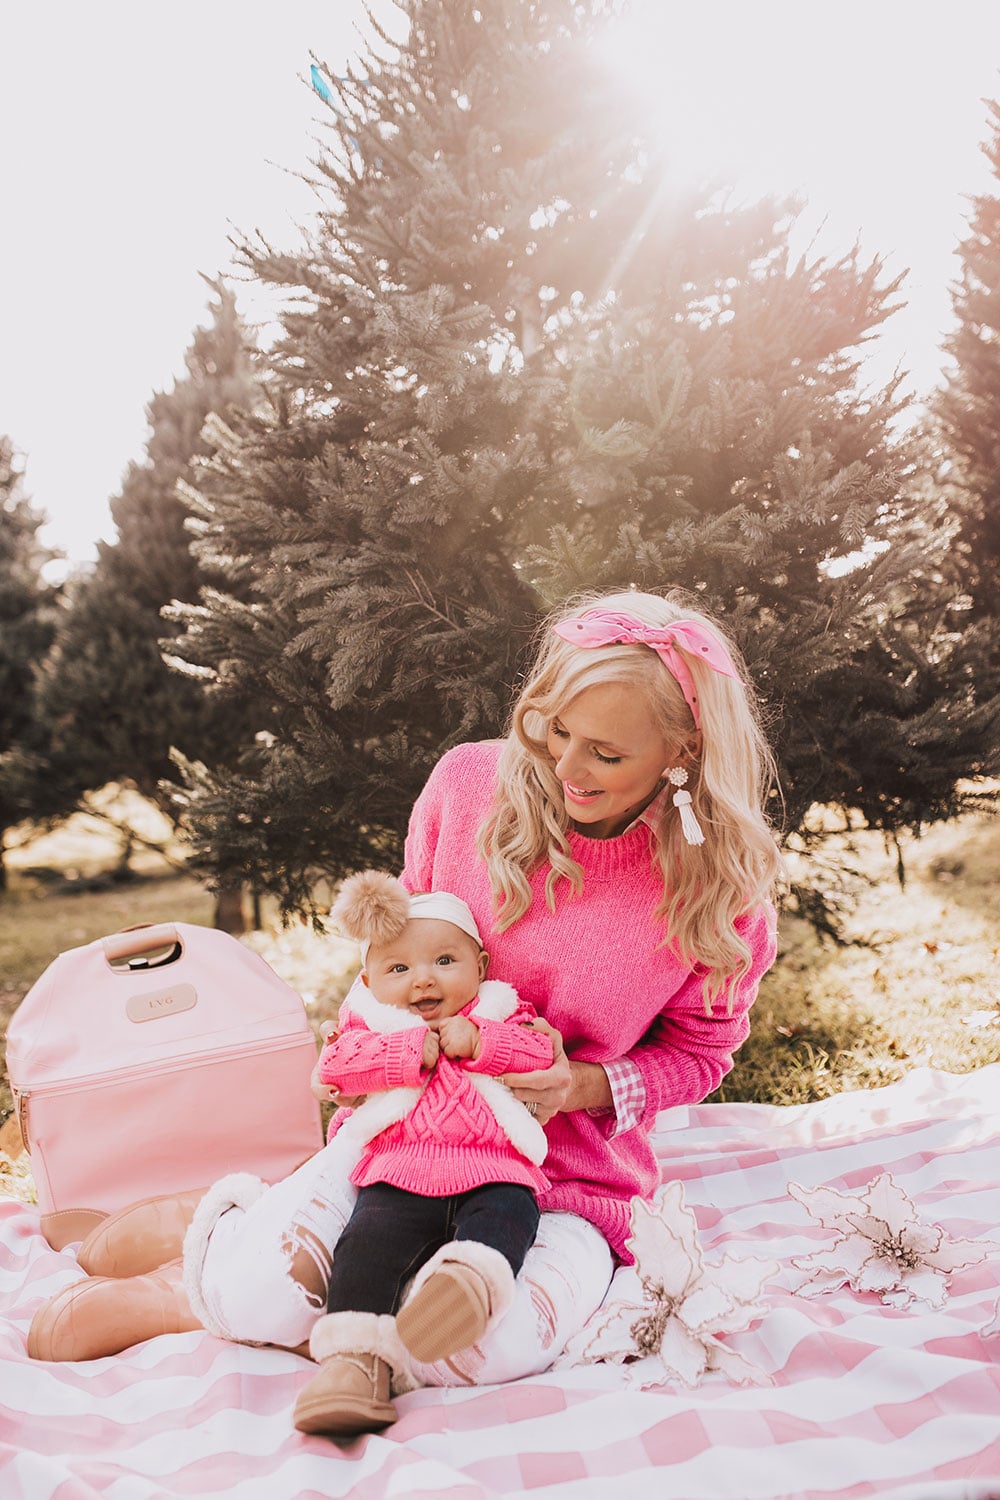 family photo ideas - mommy and me photography tips and poses - sitting on blanket in park